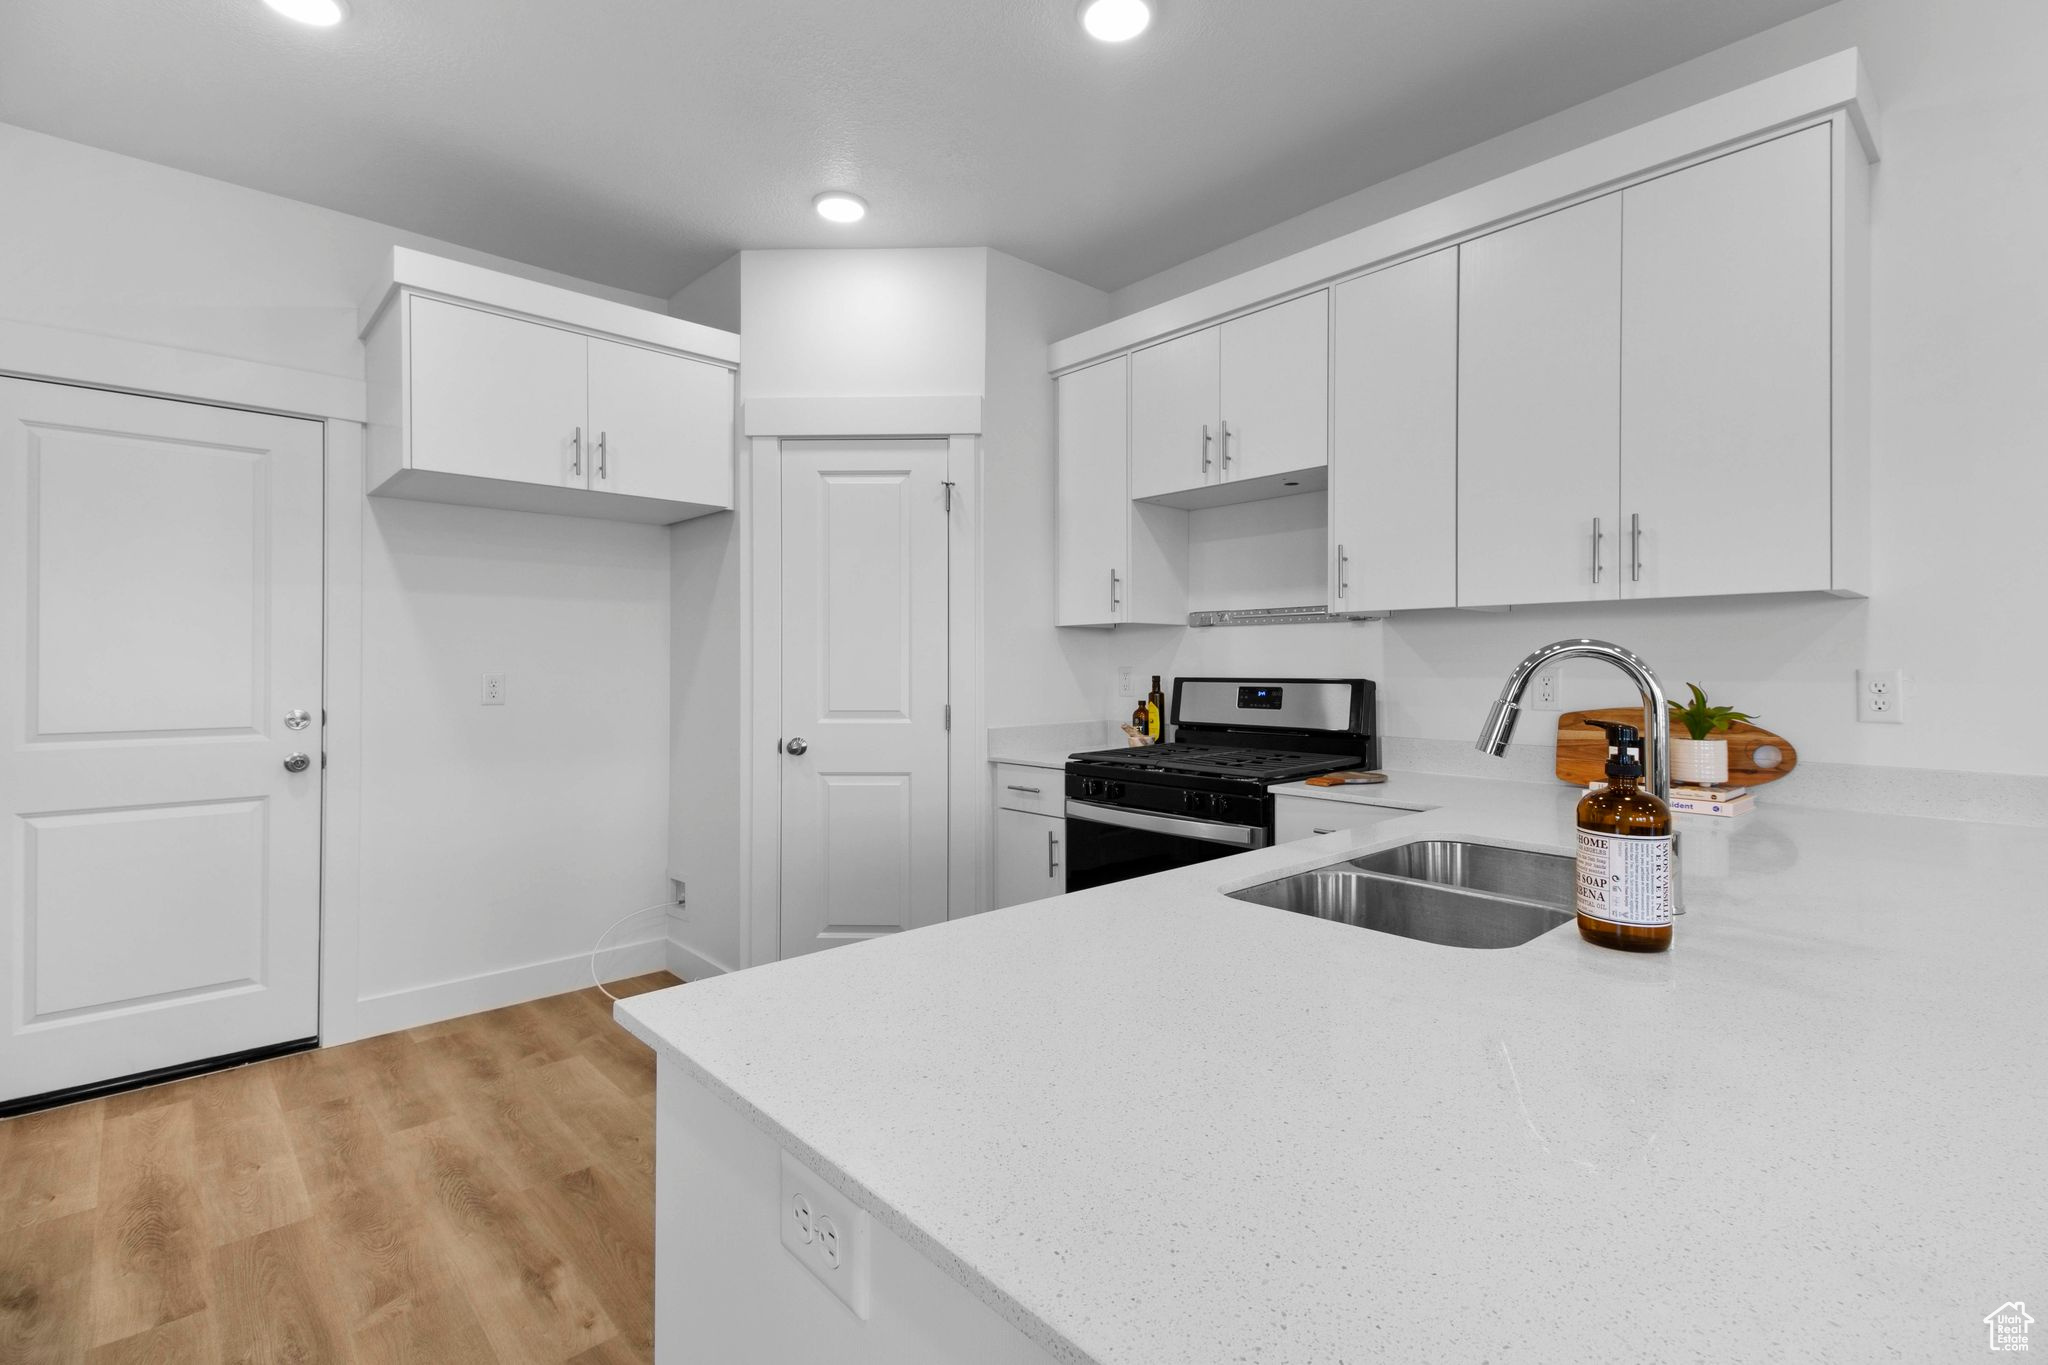 Kitchen featuring light hardwood / wood-style flooring, sink, white cabinetry, and stainless steel gas range oven